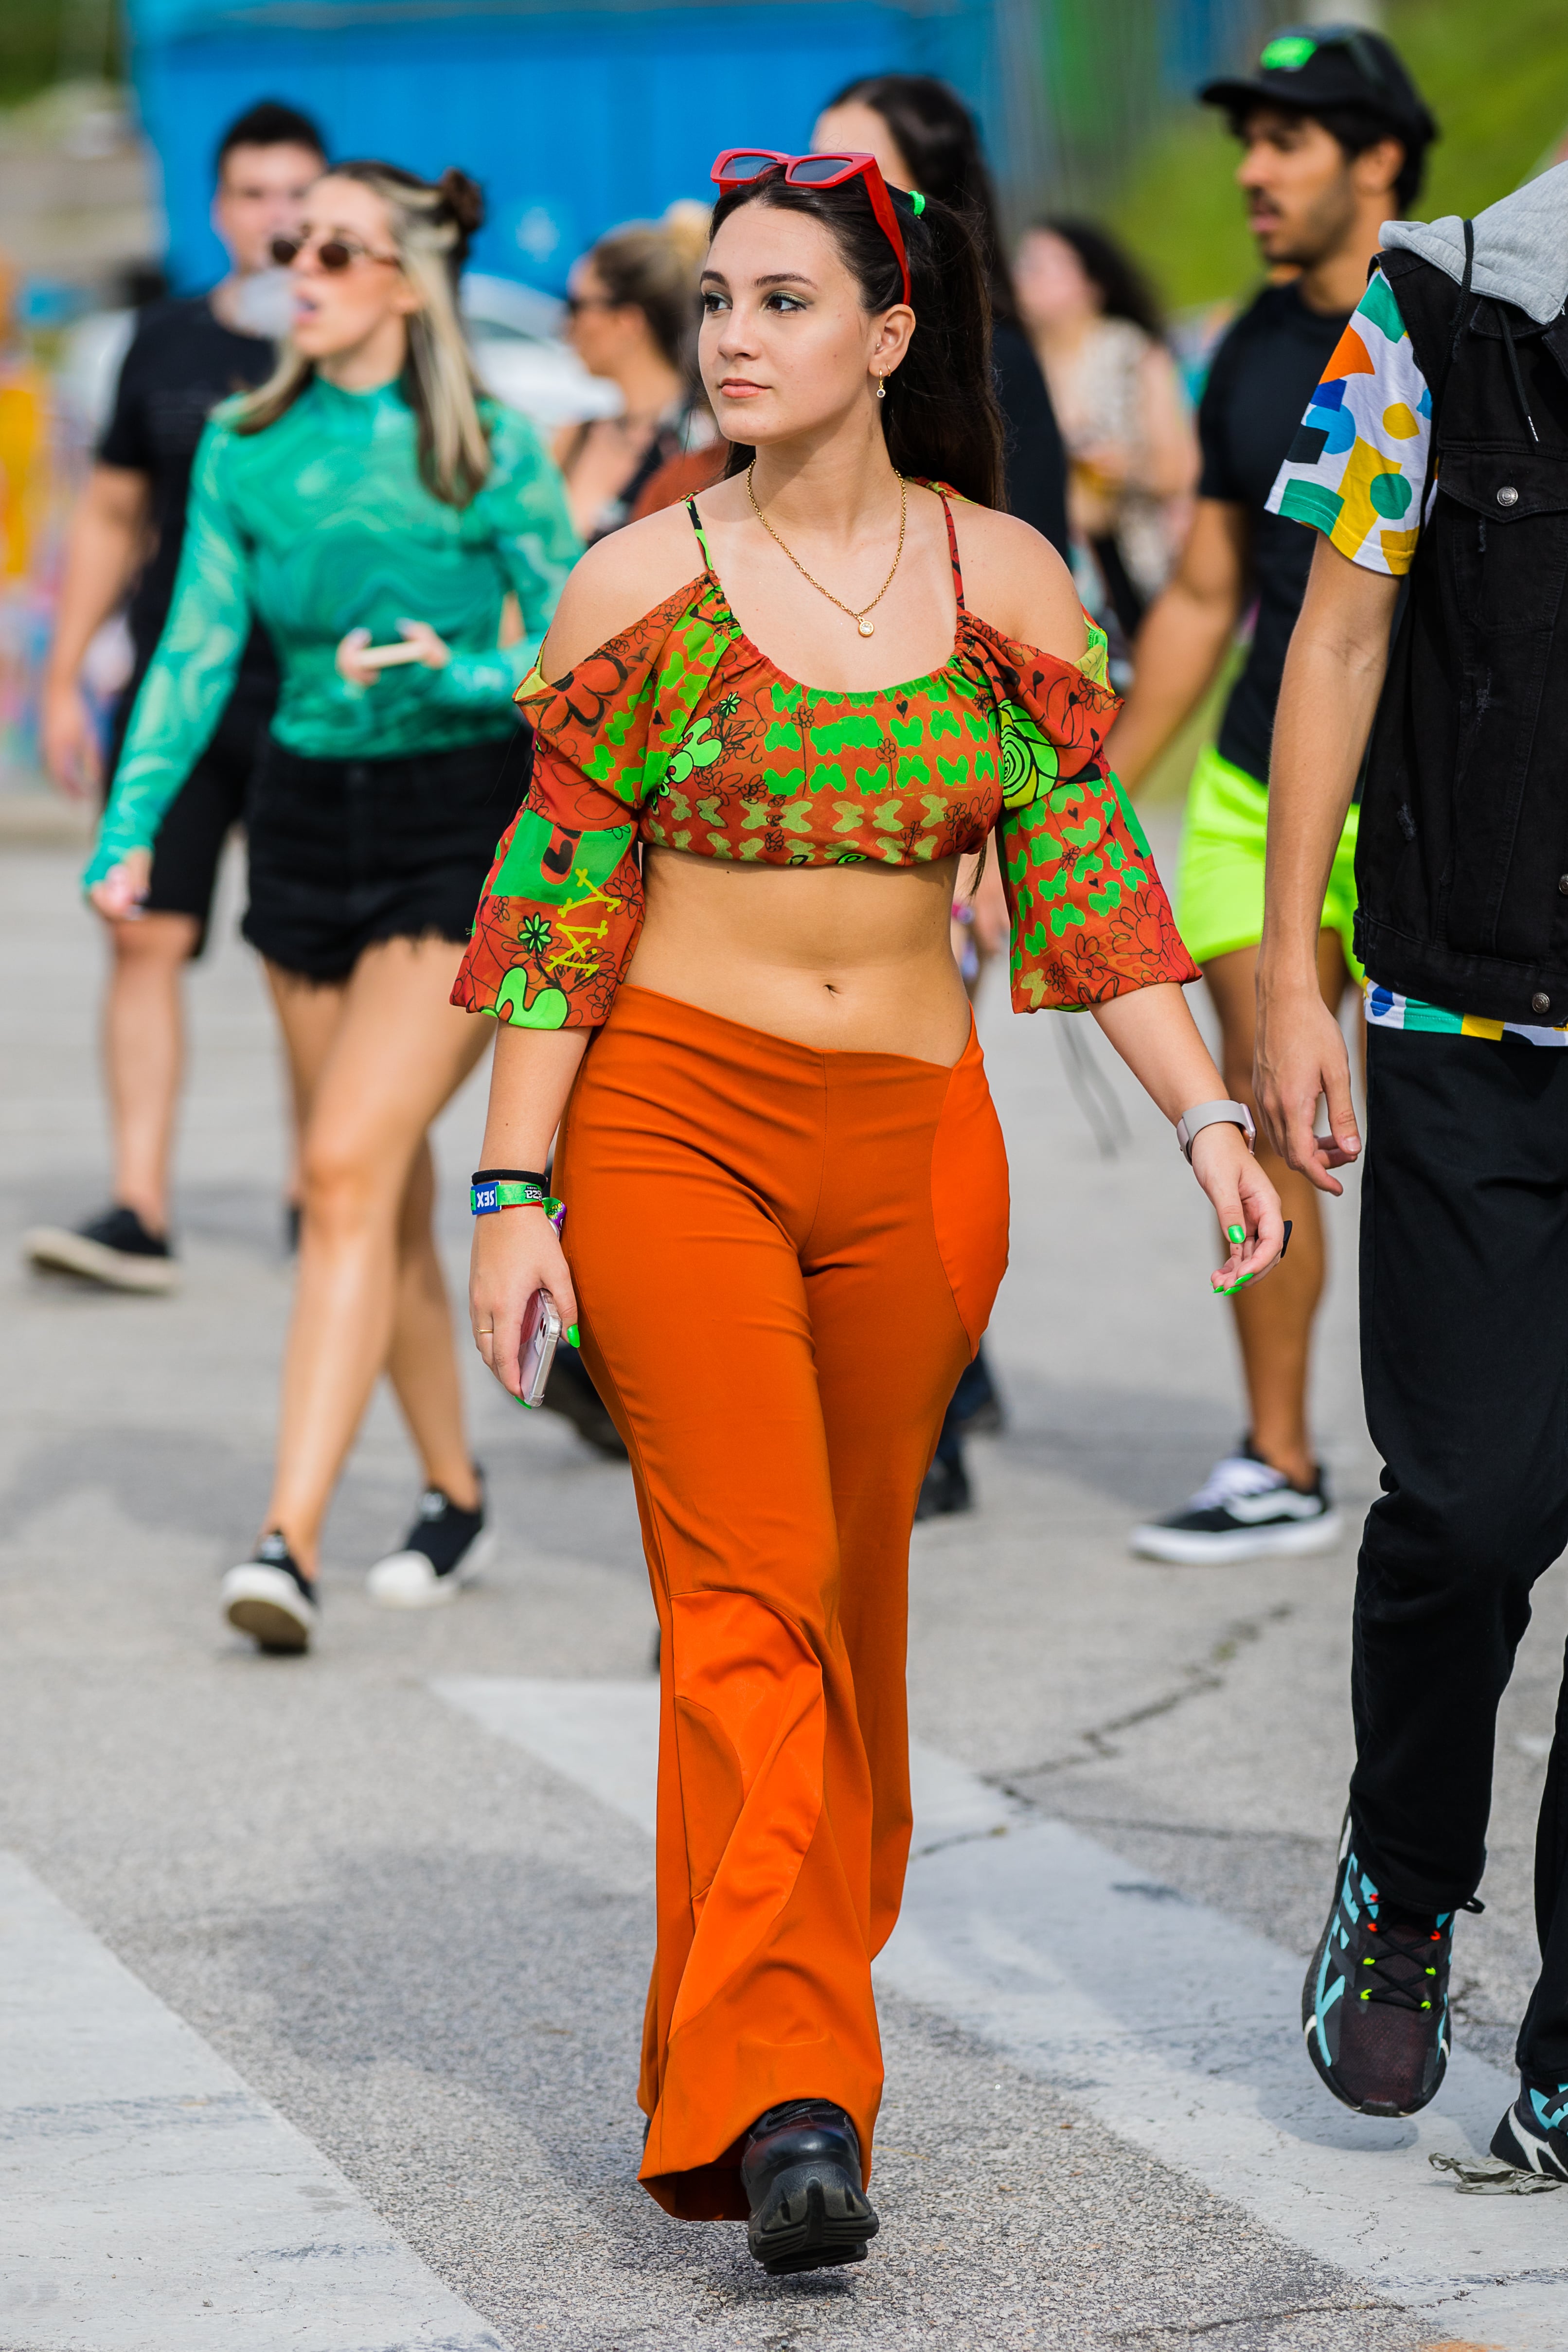 26 Crop Top Outfits to Test Out This Summer